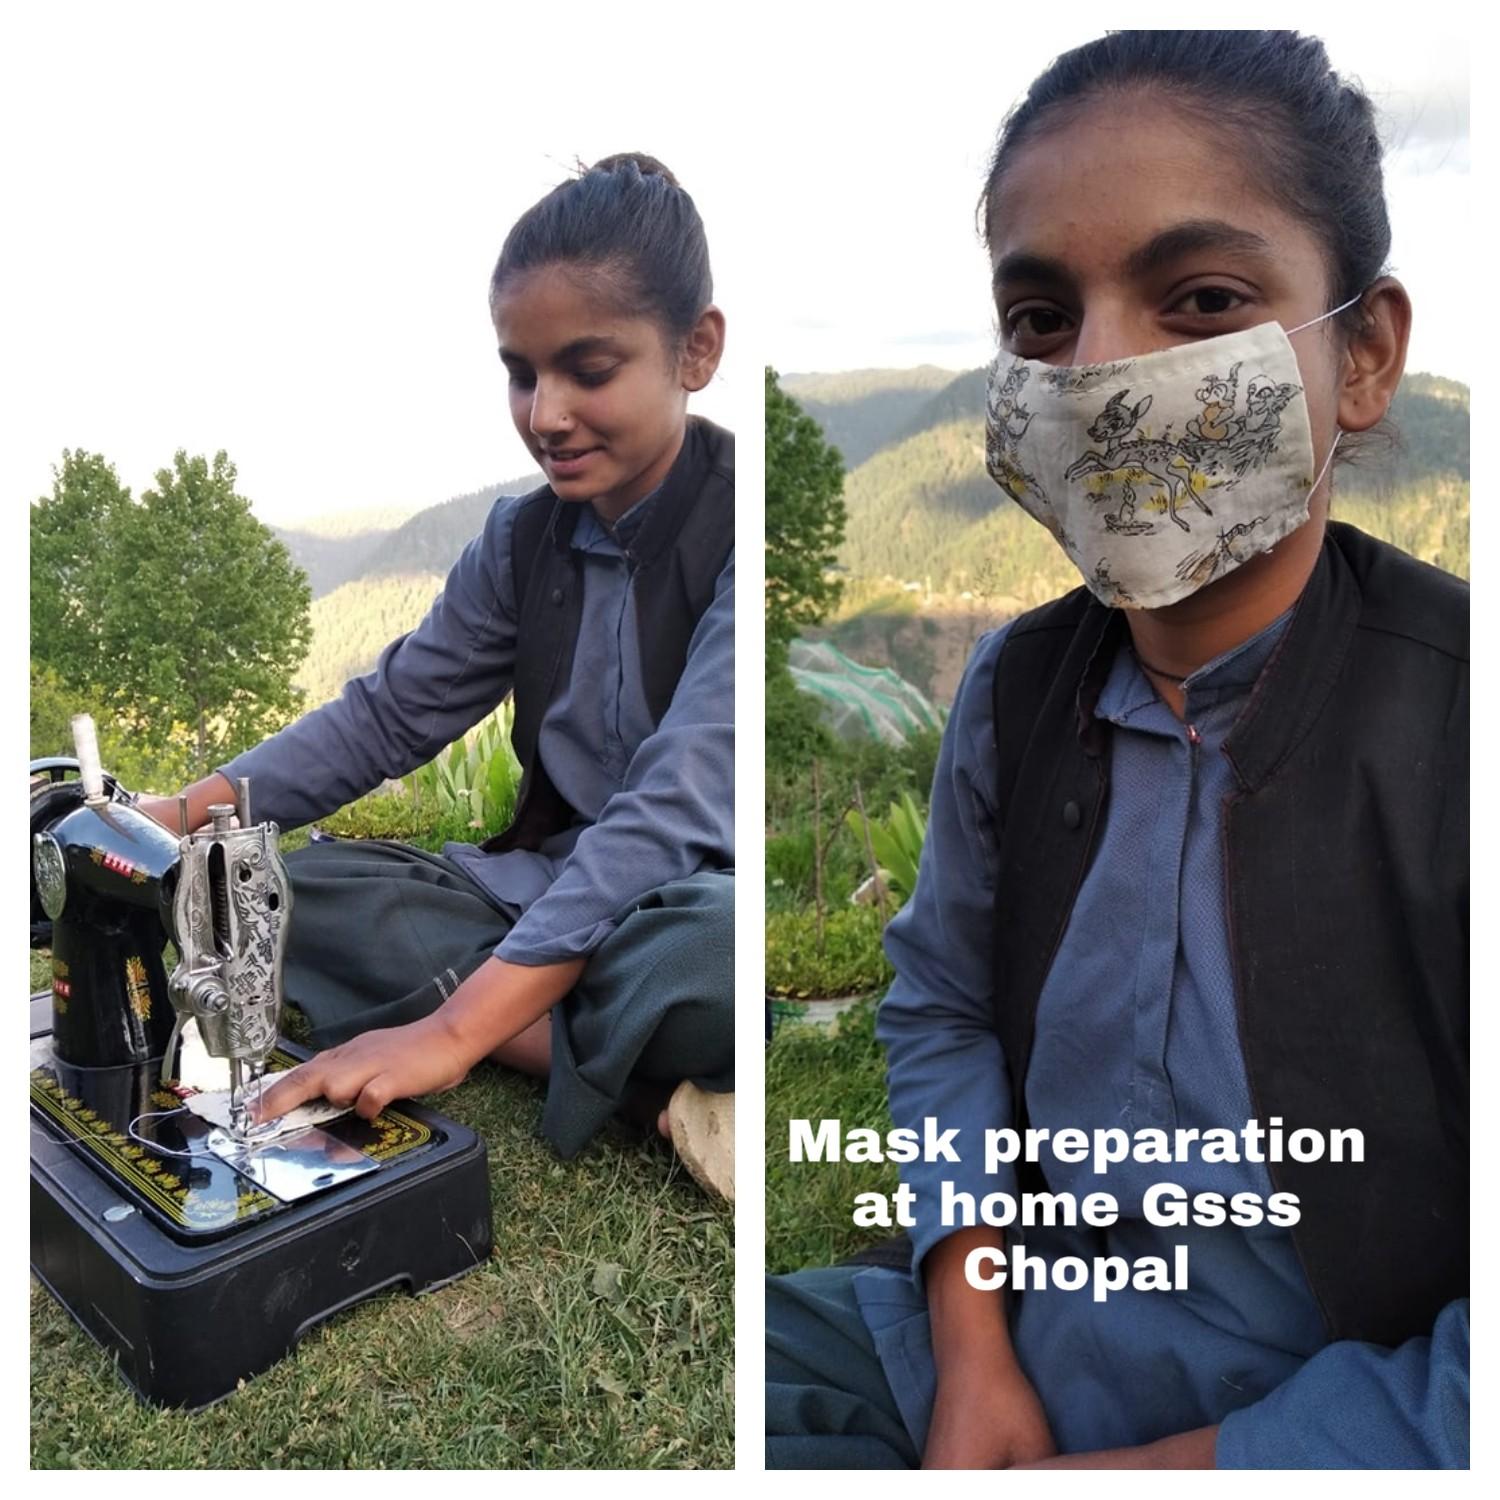 Mask preparation by students at home